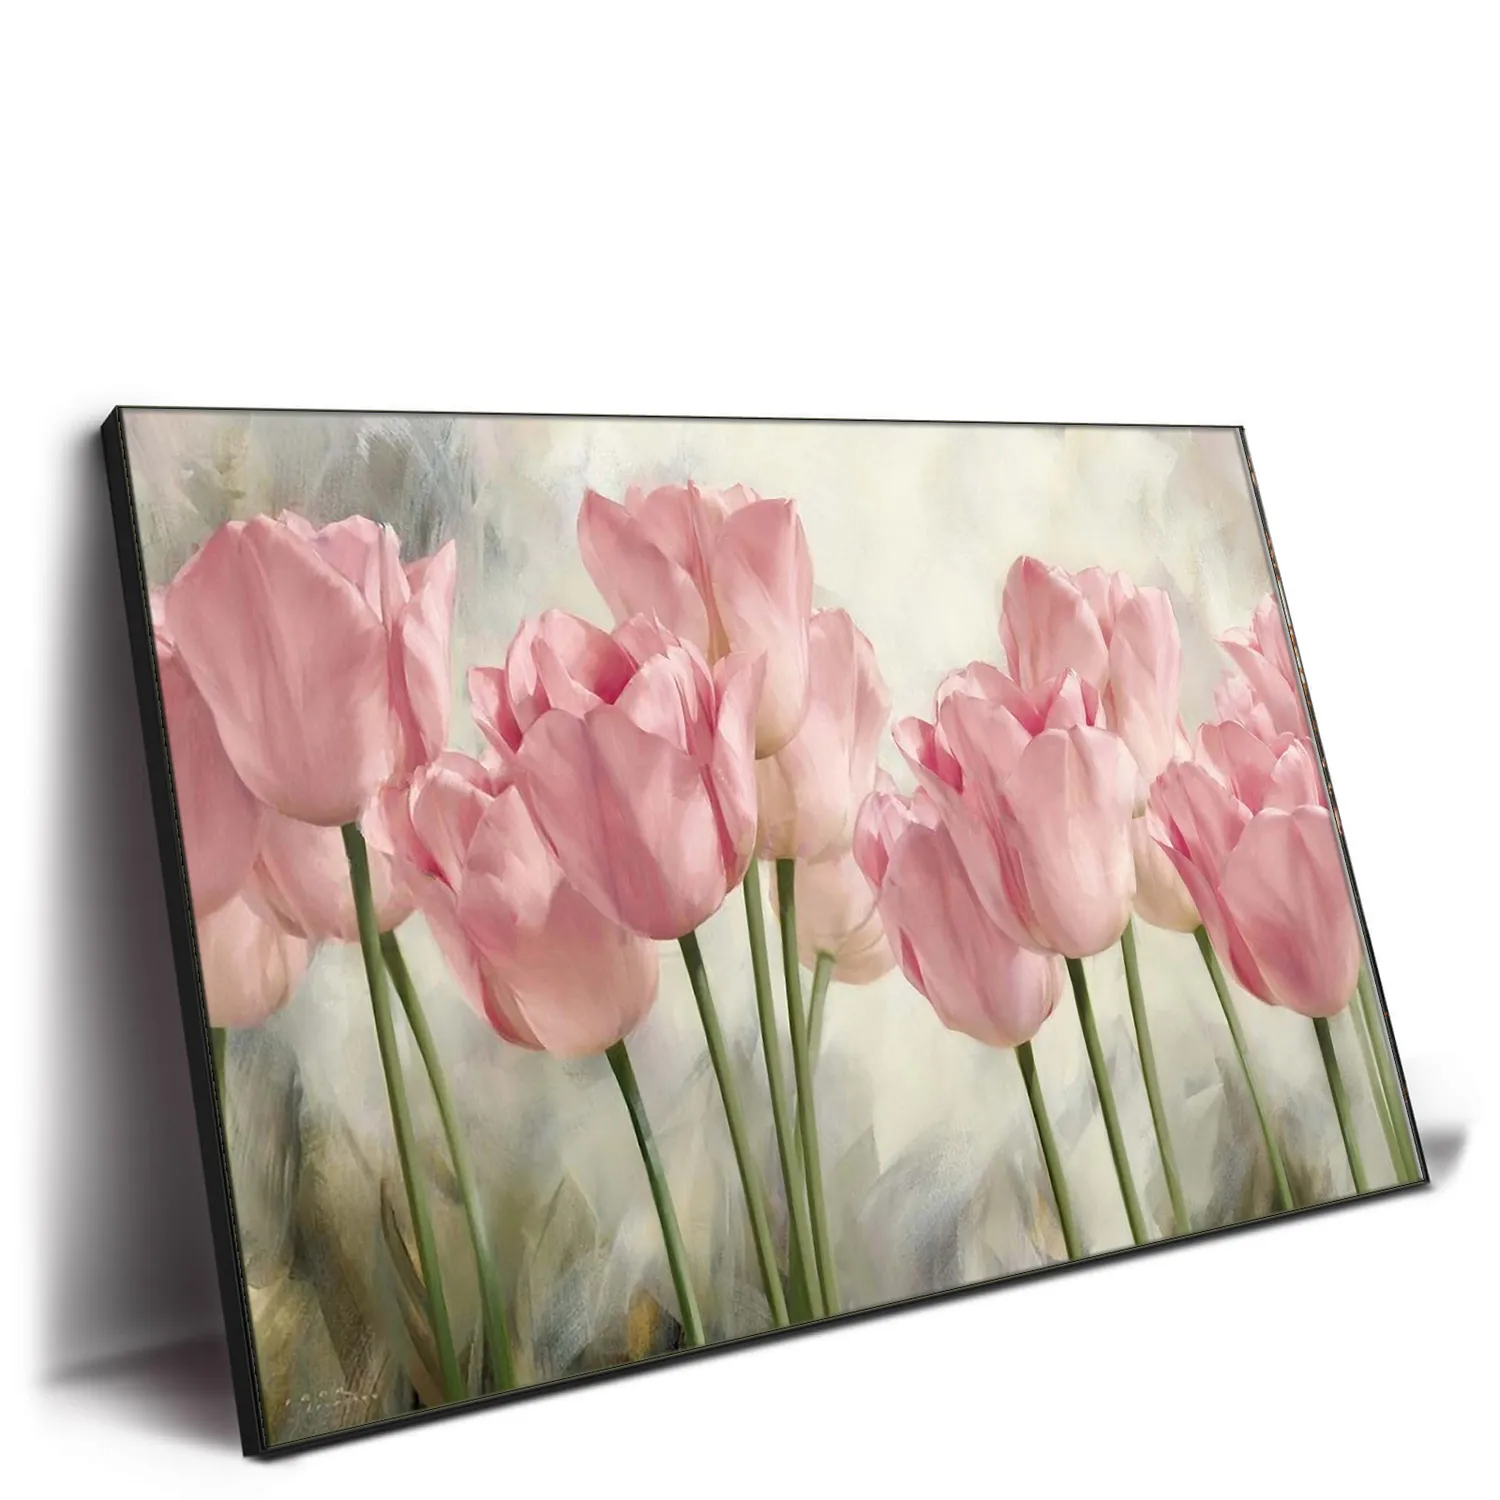 Beautiful Colorful and Pink Flowers Painting Landscape Picture Wall Art Print on Canvas Poster for Bedroom Decoration